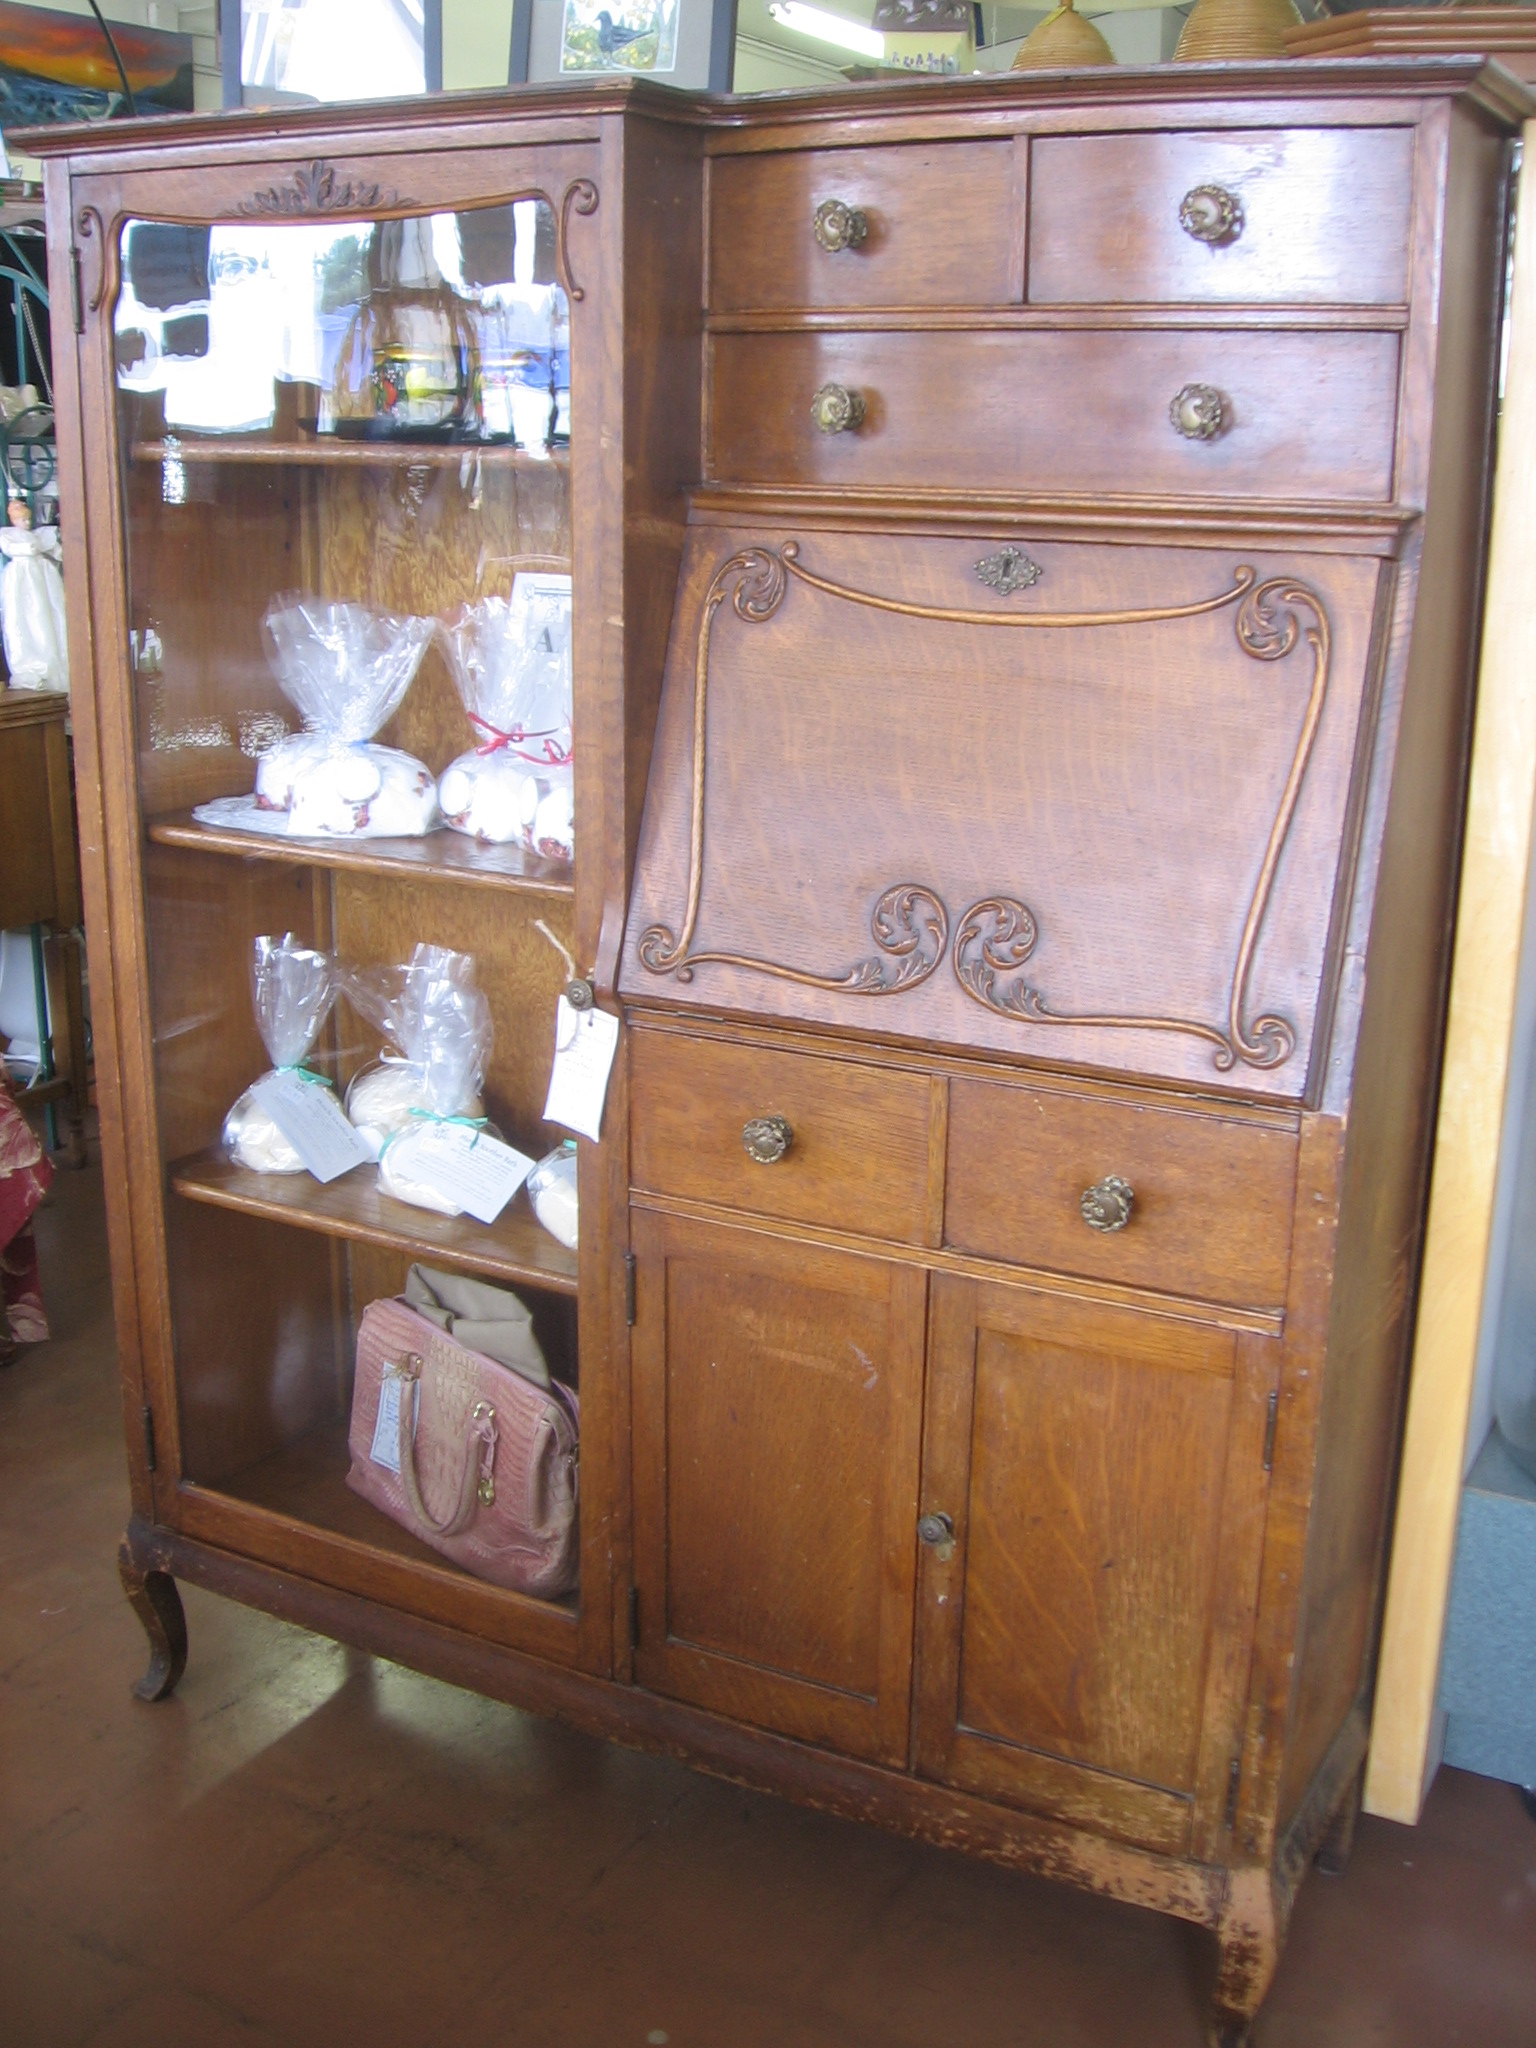 a wooden dresser with an old fashioned display case